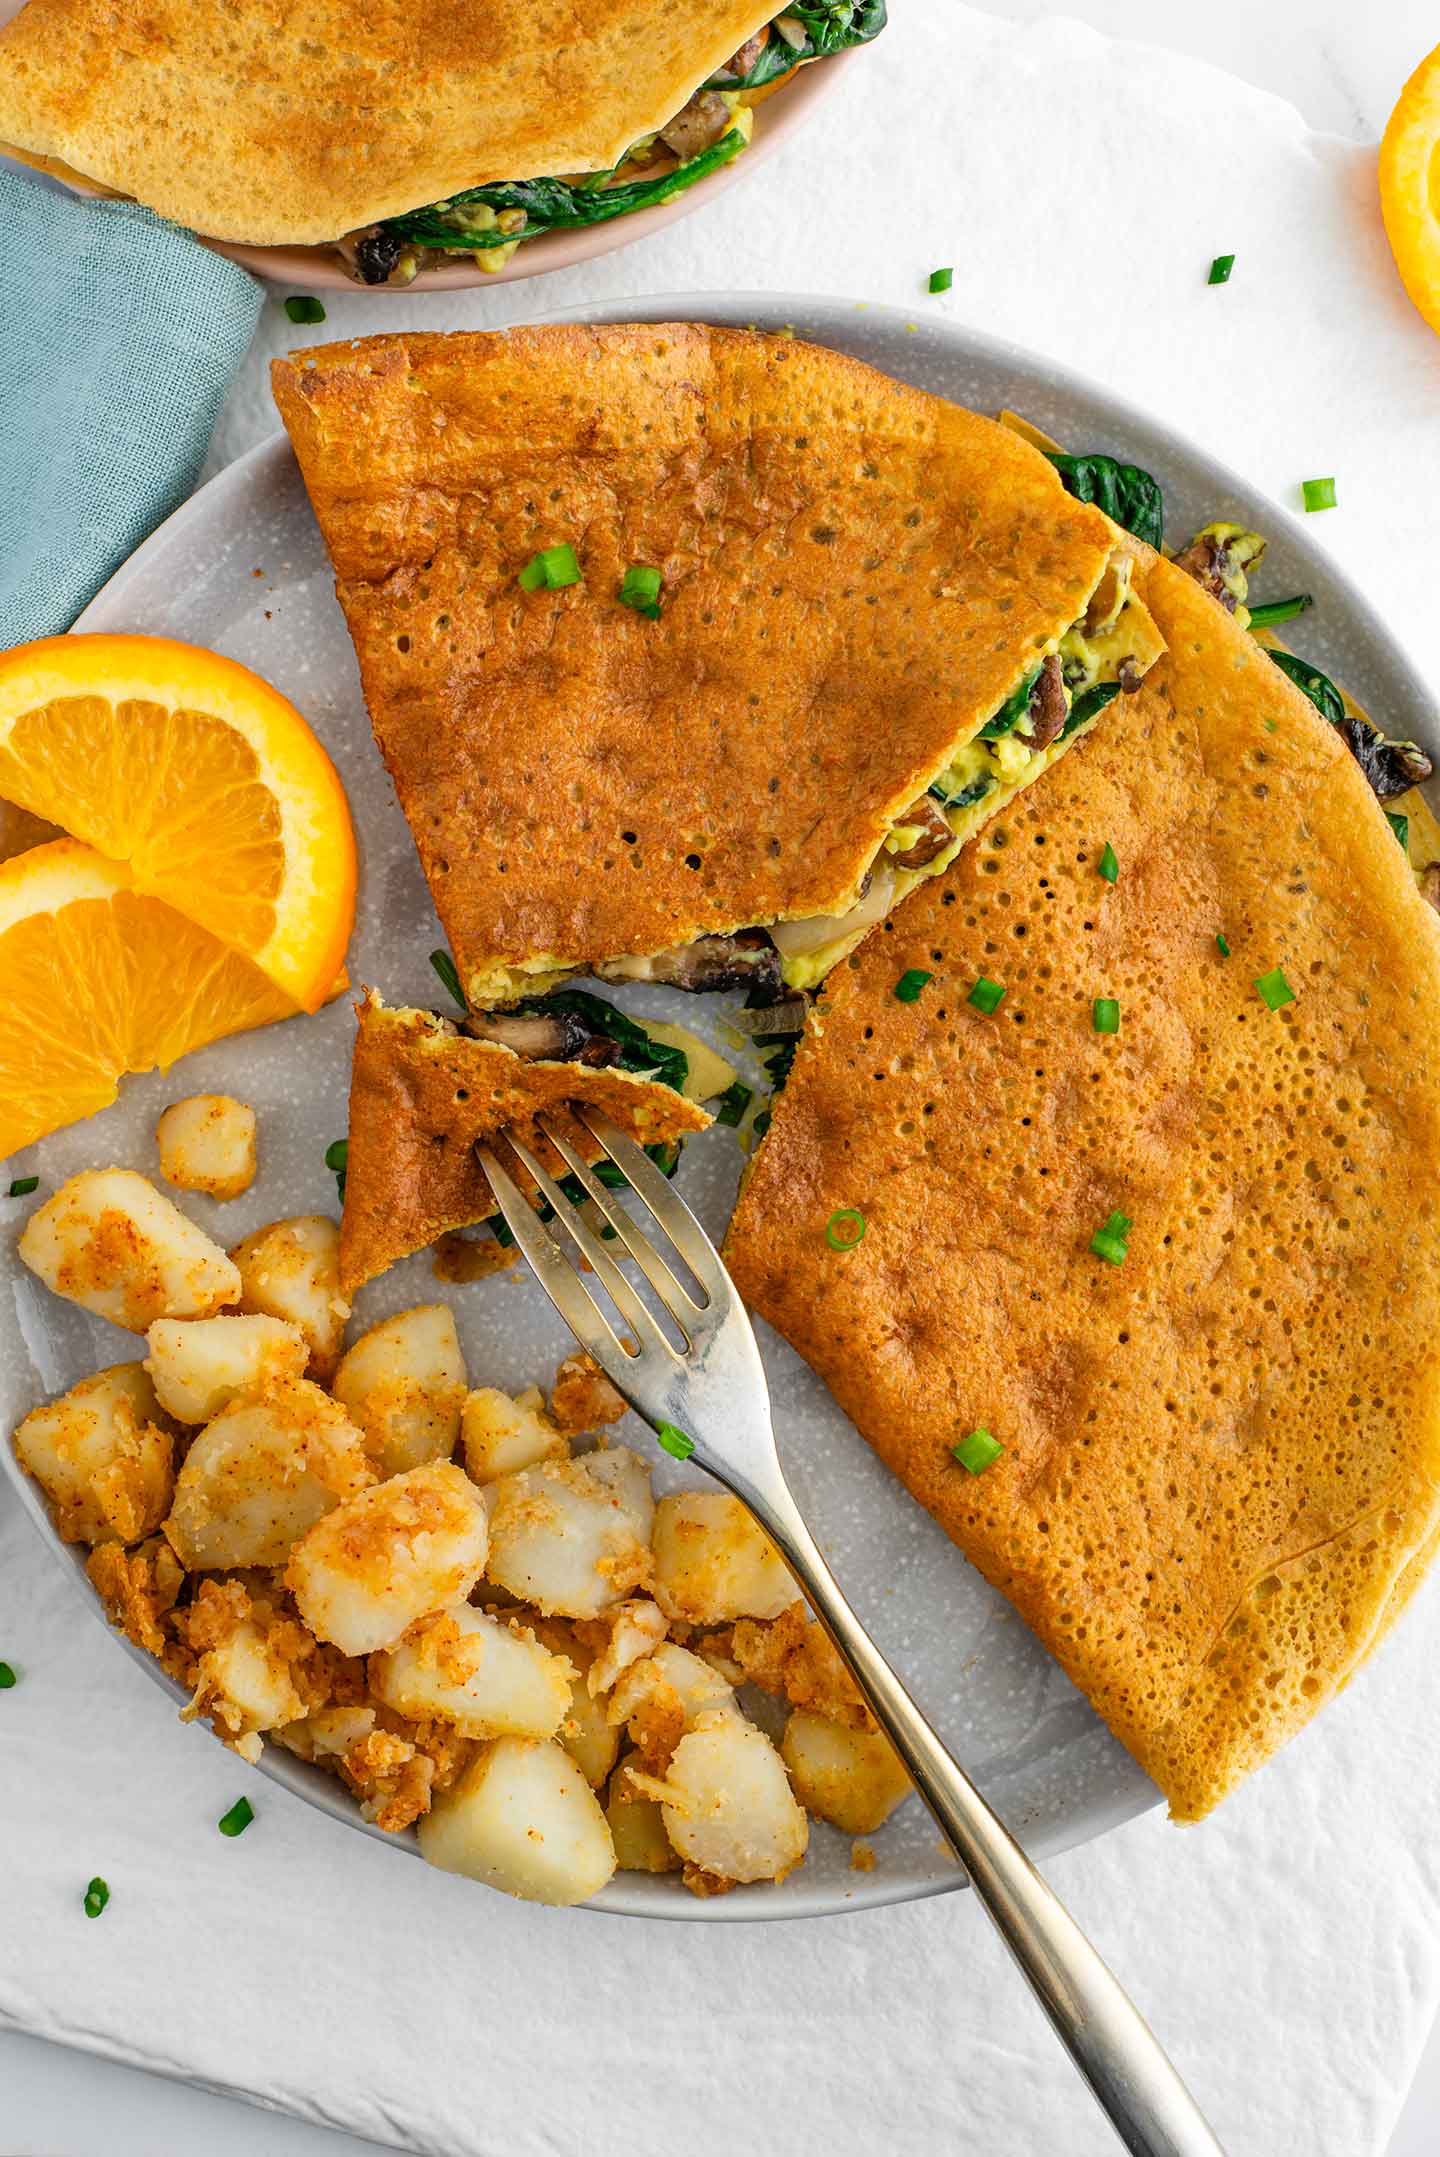 Top down view of a golden vegan omelette. The chickpea omelette is sliced to reveal a filling of mushrooms, spinach, onion, and homemade vegan cheese. 